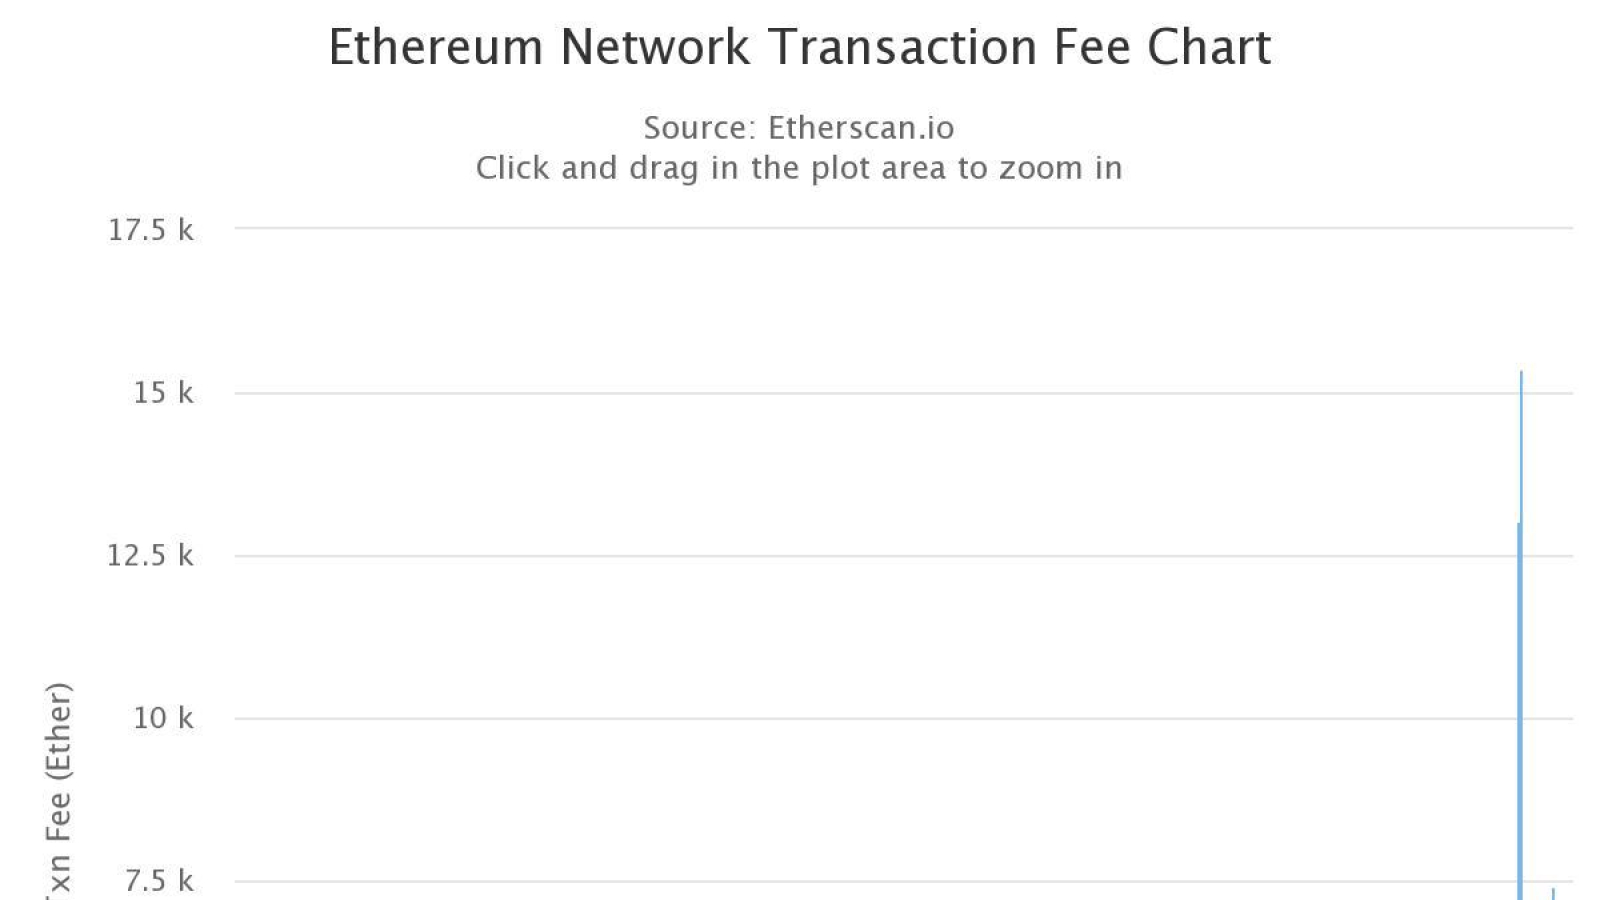 Network fees on Ethereum